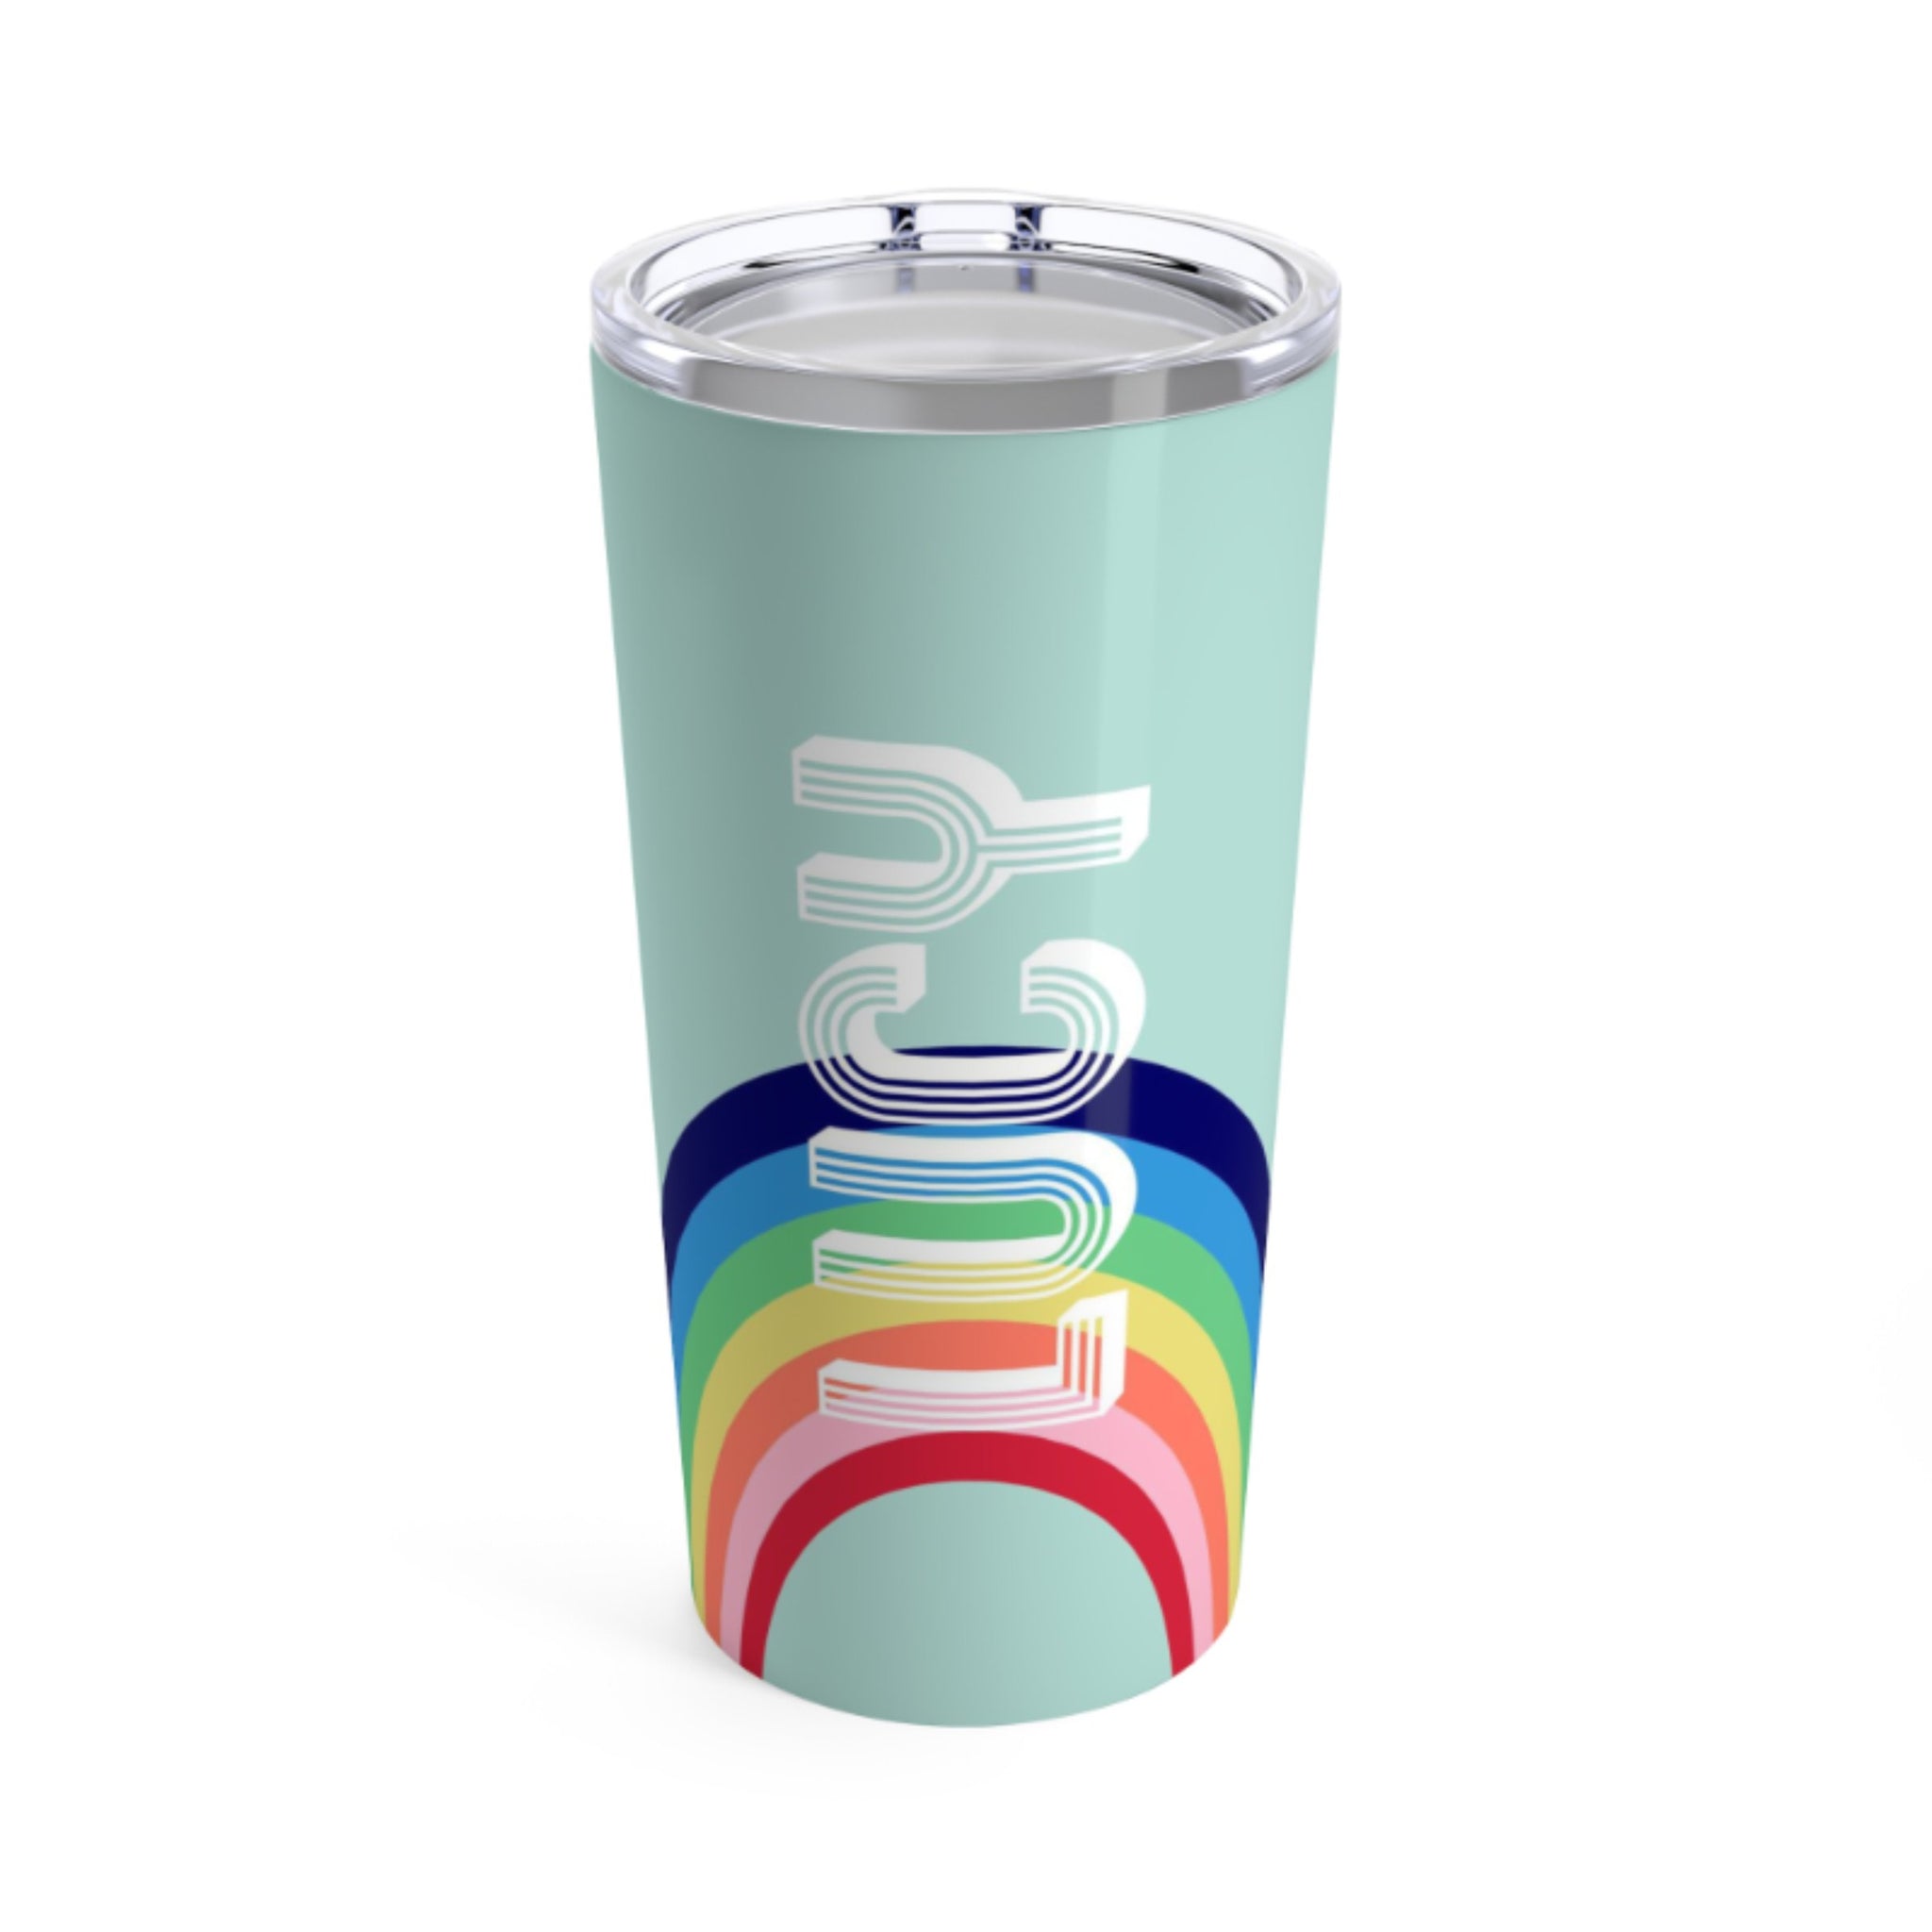 Large personalized rainbow stainless steel tumbler from Belle & Ten